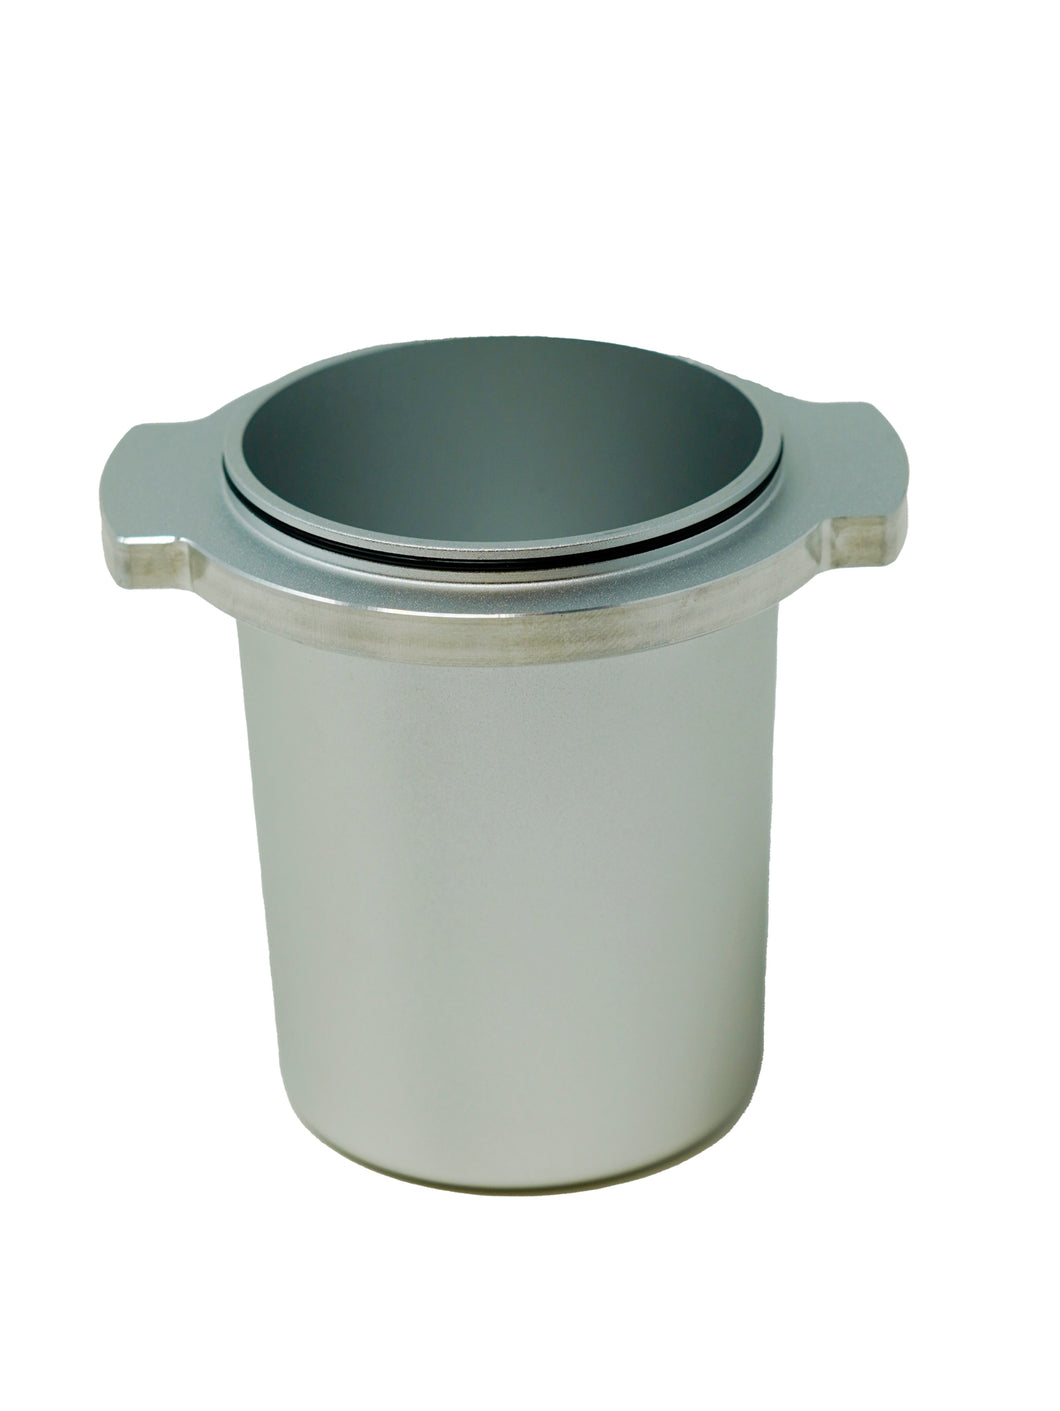 58mm Metal Dosing Cup for the Turin DF64 Grinder